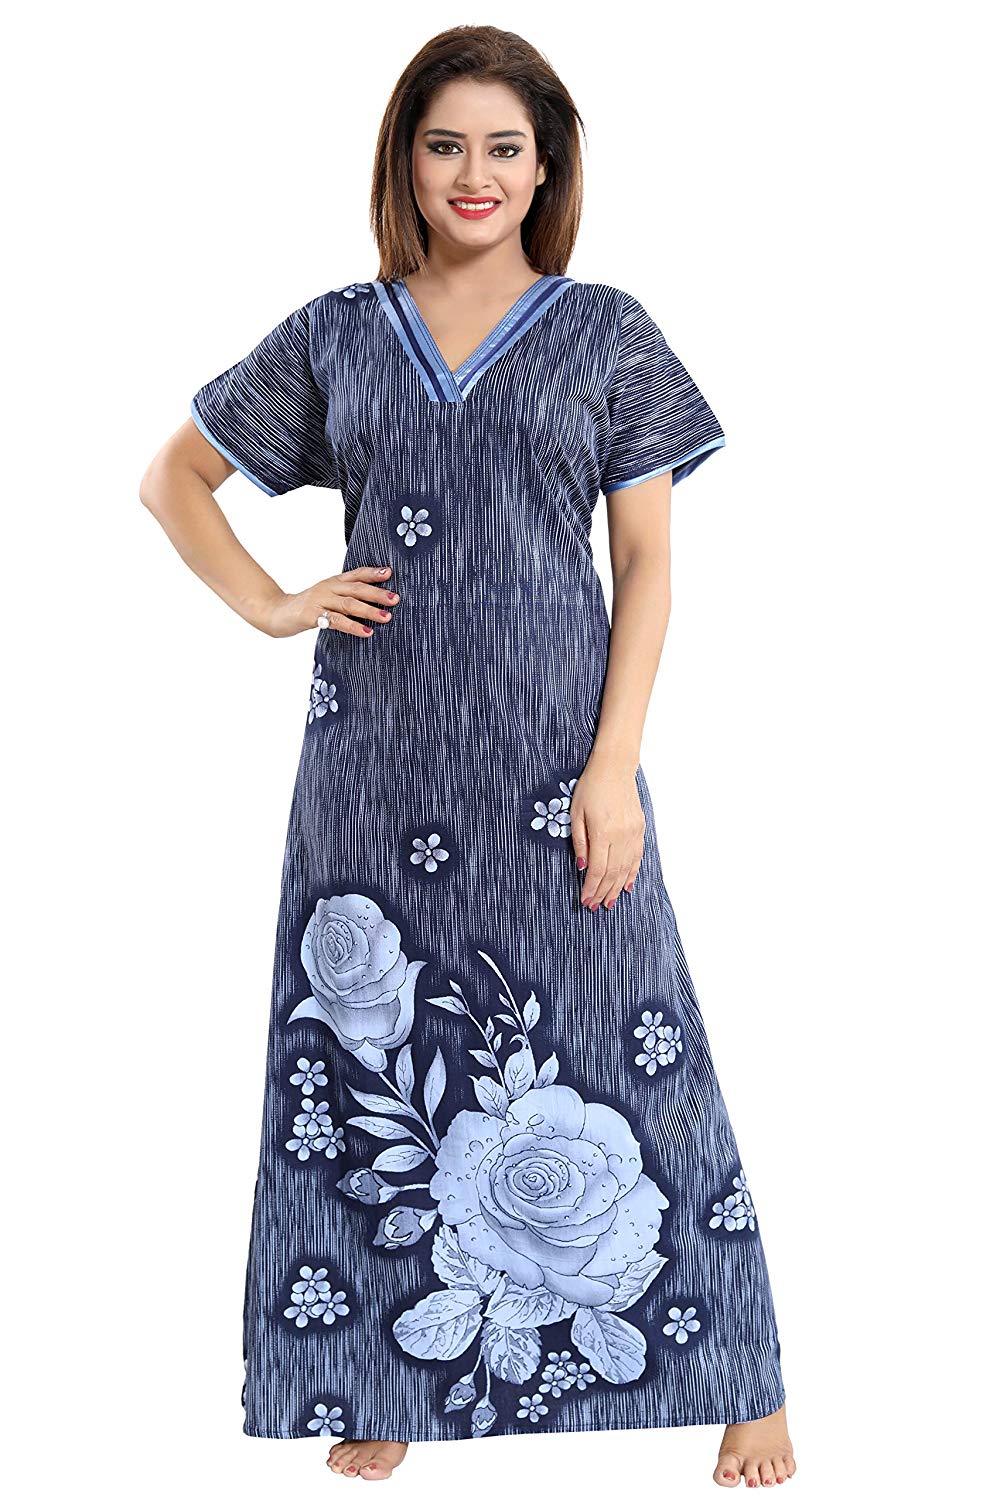 Buy HauteLook Women's Pure Cotton Alterable Nighty Gown in Pathan Bandhani  Dot Print Pattern with Two Button_Pocket & Short Sleeves (Large, Aqua Blue)  at Amazon.in